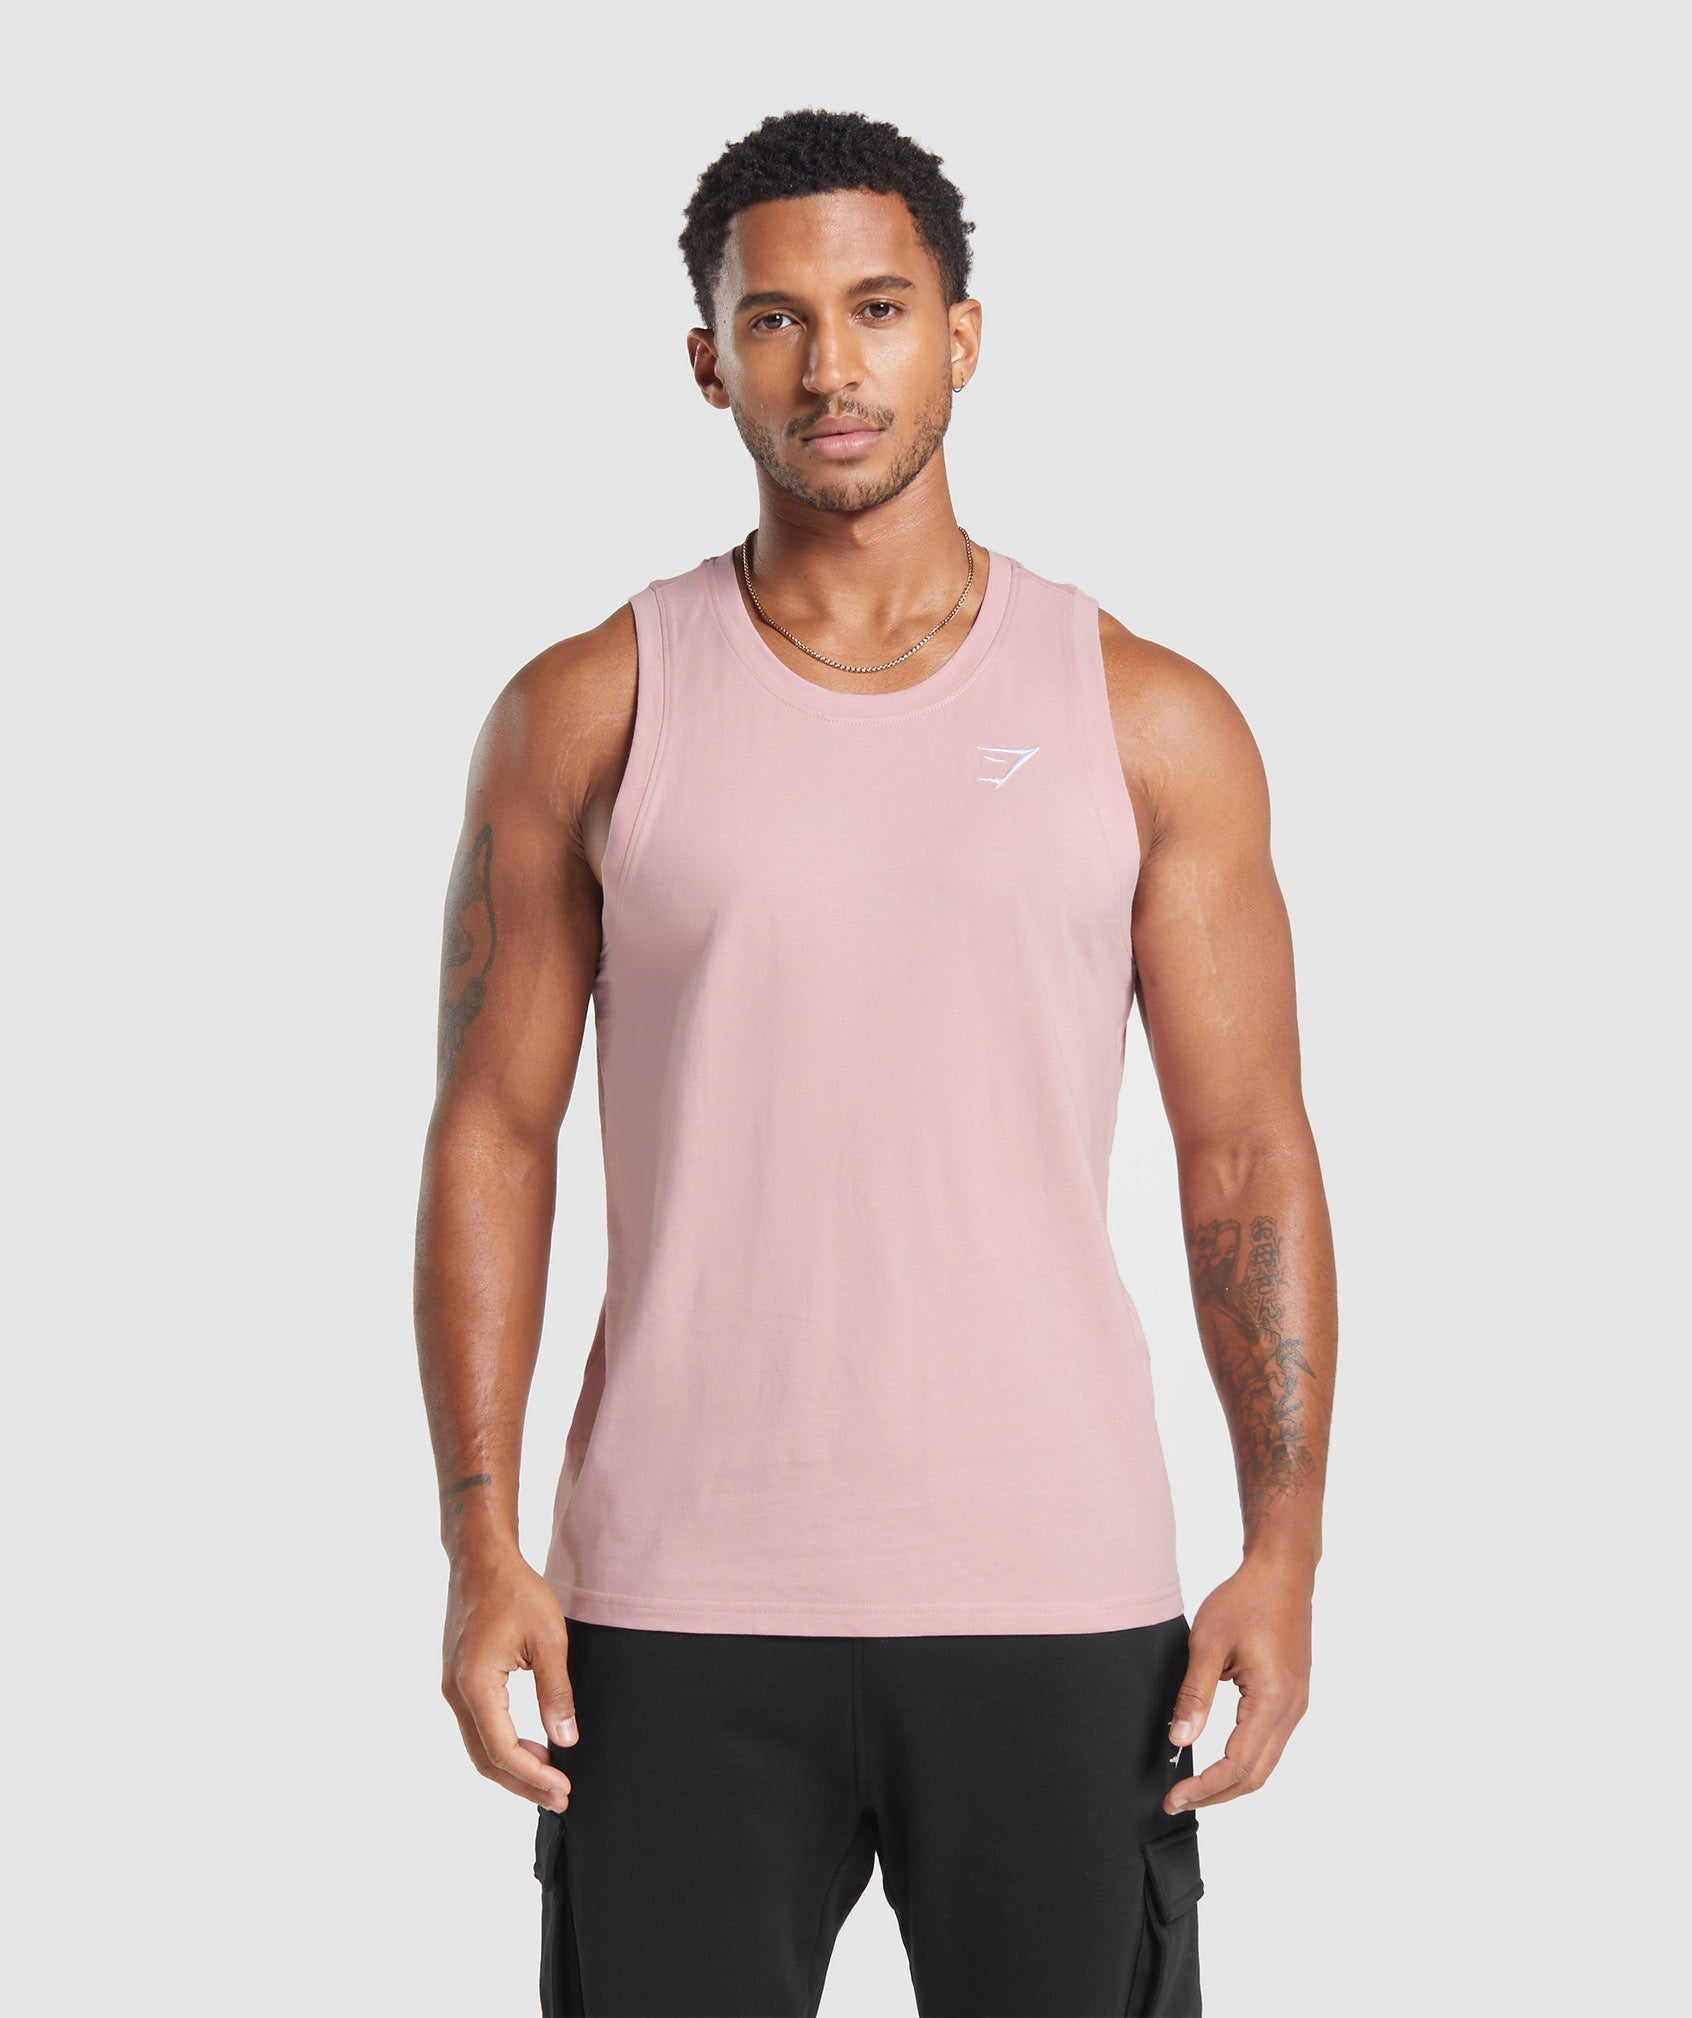 Crest Tank in Light Pink - view 1